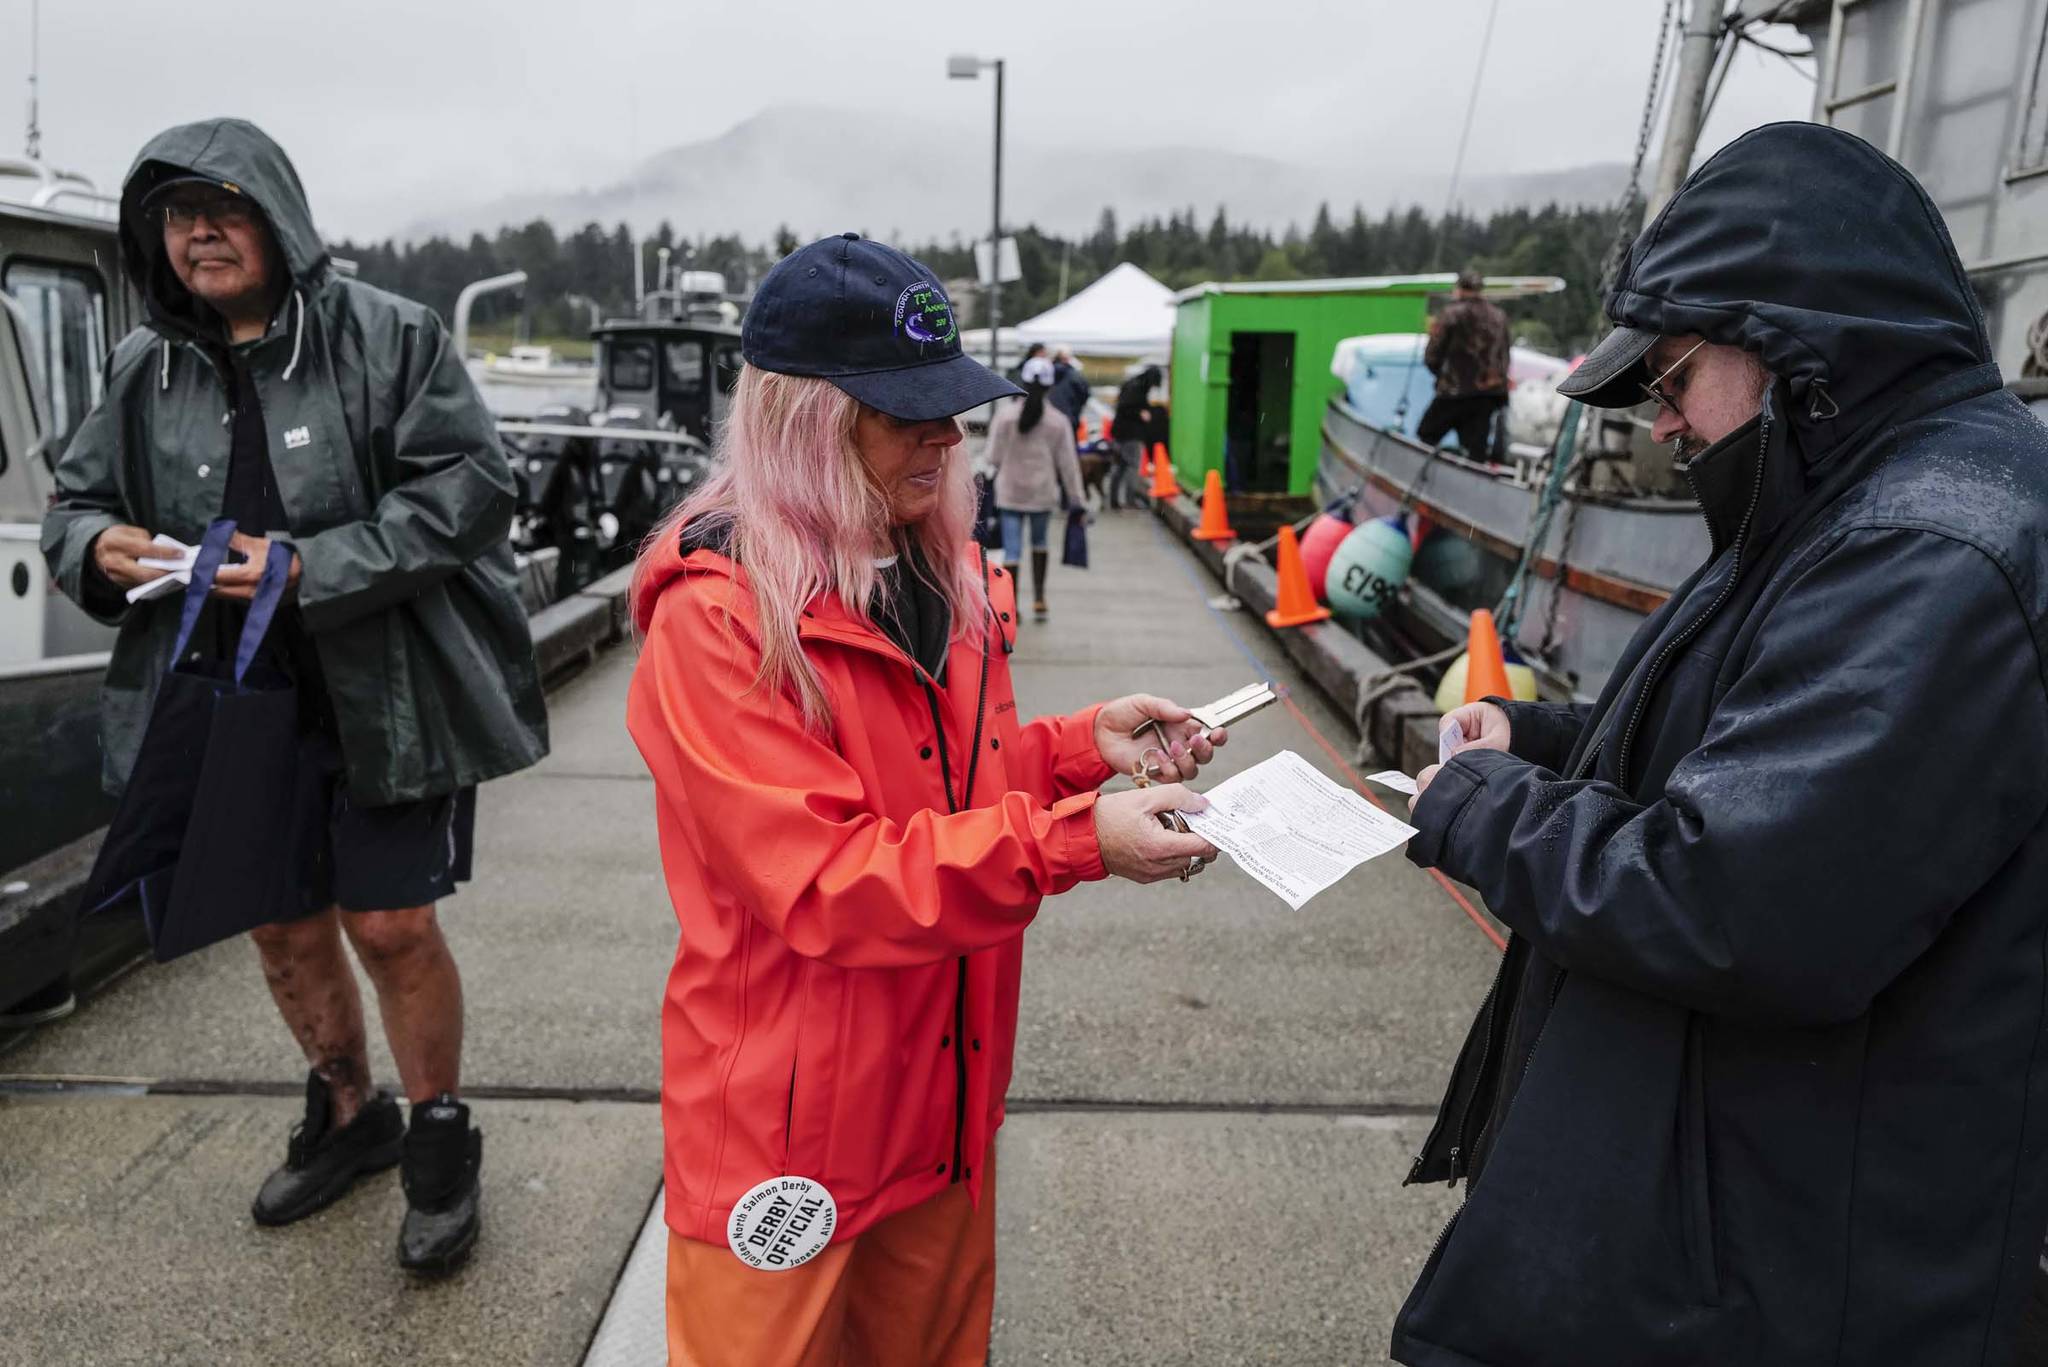 Derby Official Cheri Wharton validates Jeremy Dunn’s ticket at the Don D. Statter Boat Harbor in Auke Bay at the start of the Golden North Salmon Derby on Friday, Aug. 23, 2019. (Michael Penn | Juneau Empire)